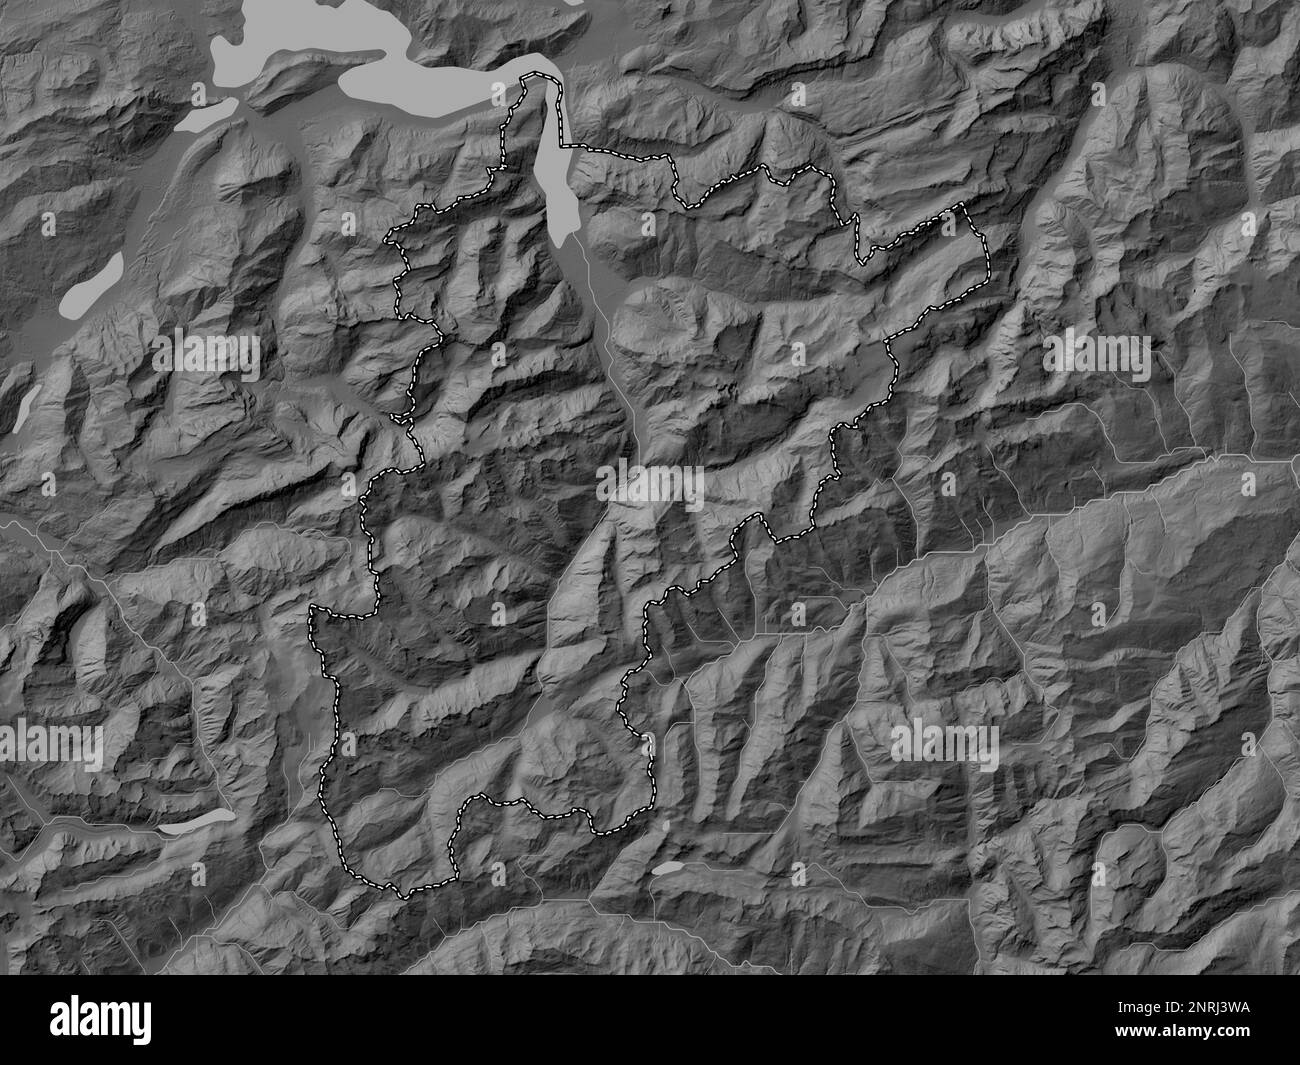 Uri, canton of Switzerland. Bilevel elevation map with lakes and rivers Stock Photo